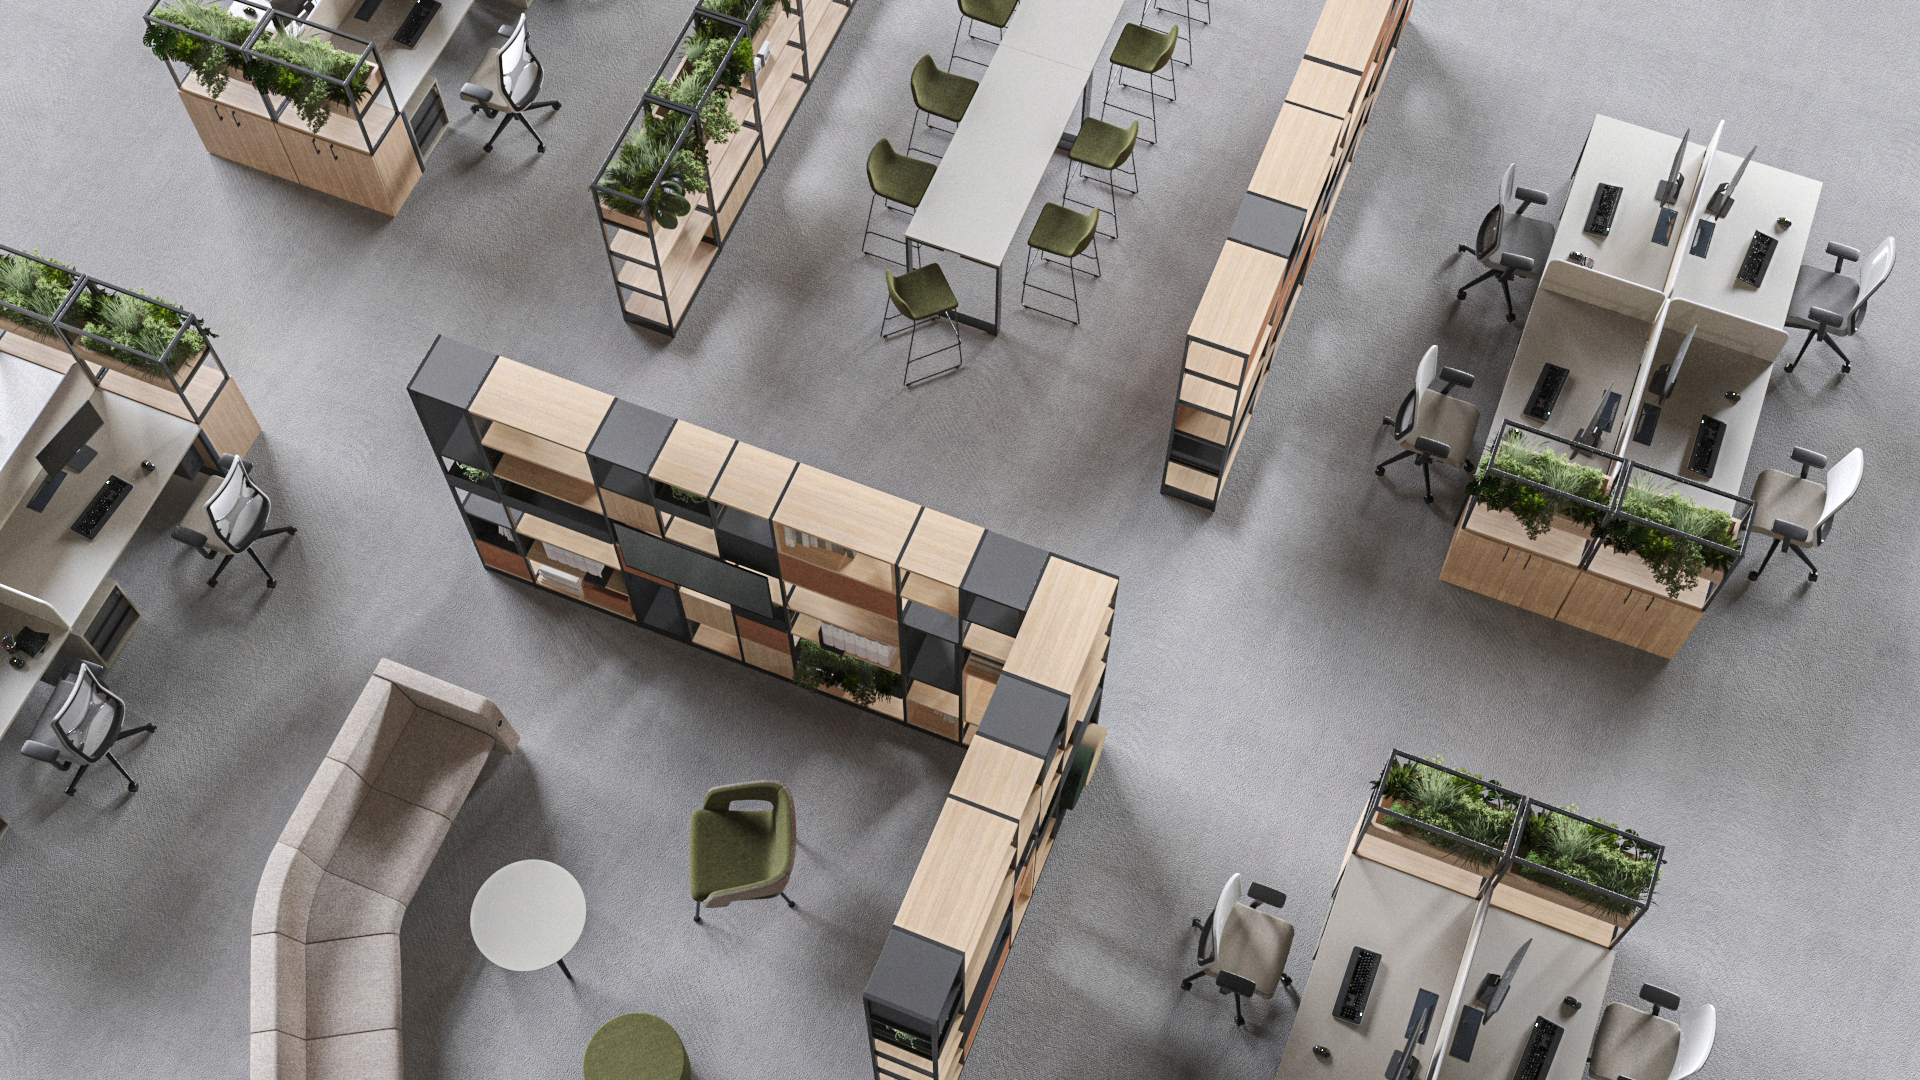 Segment workspace from breakout zones and meeting areas in open plan office environments